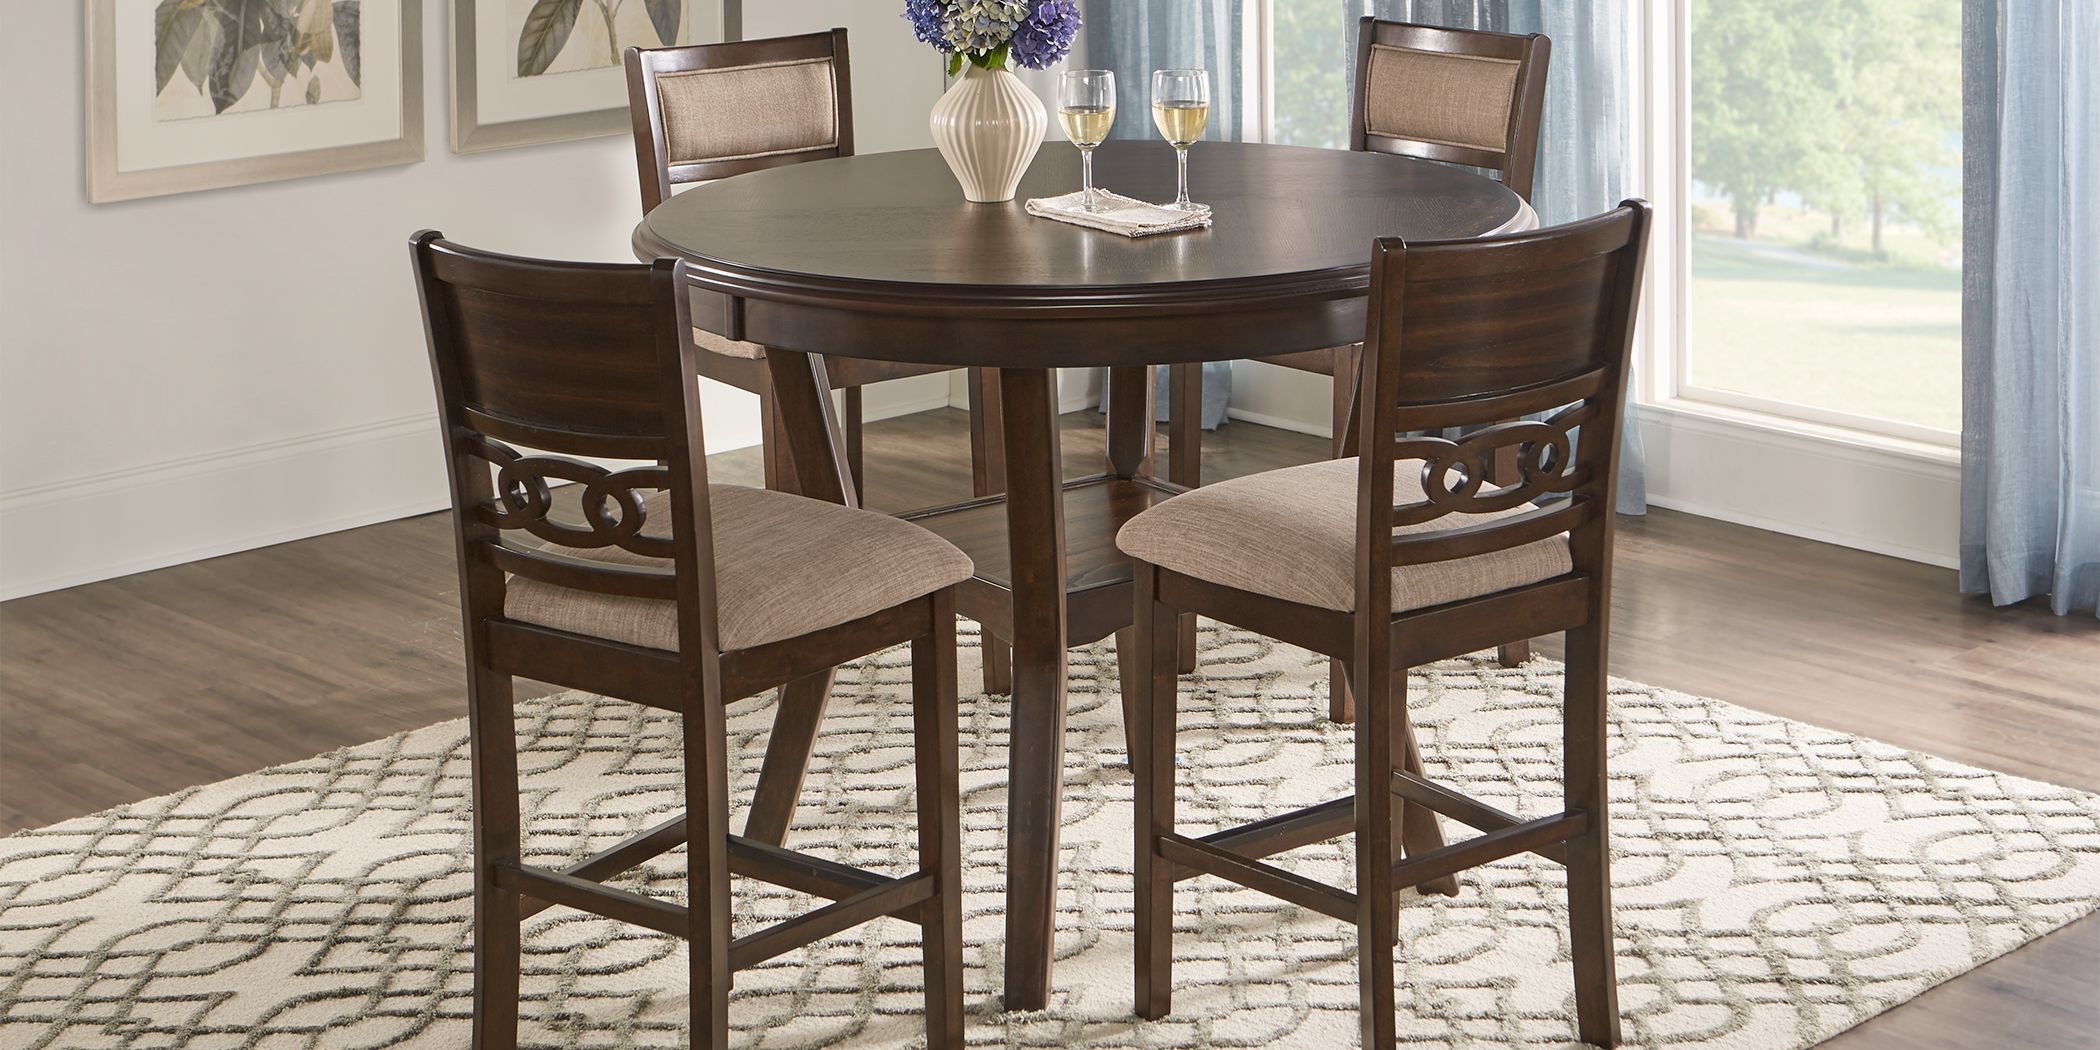 Rooms To Go Dining Room Furniture, Rooms To Go Dining Room Tables